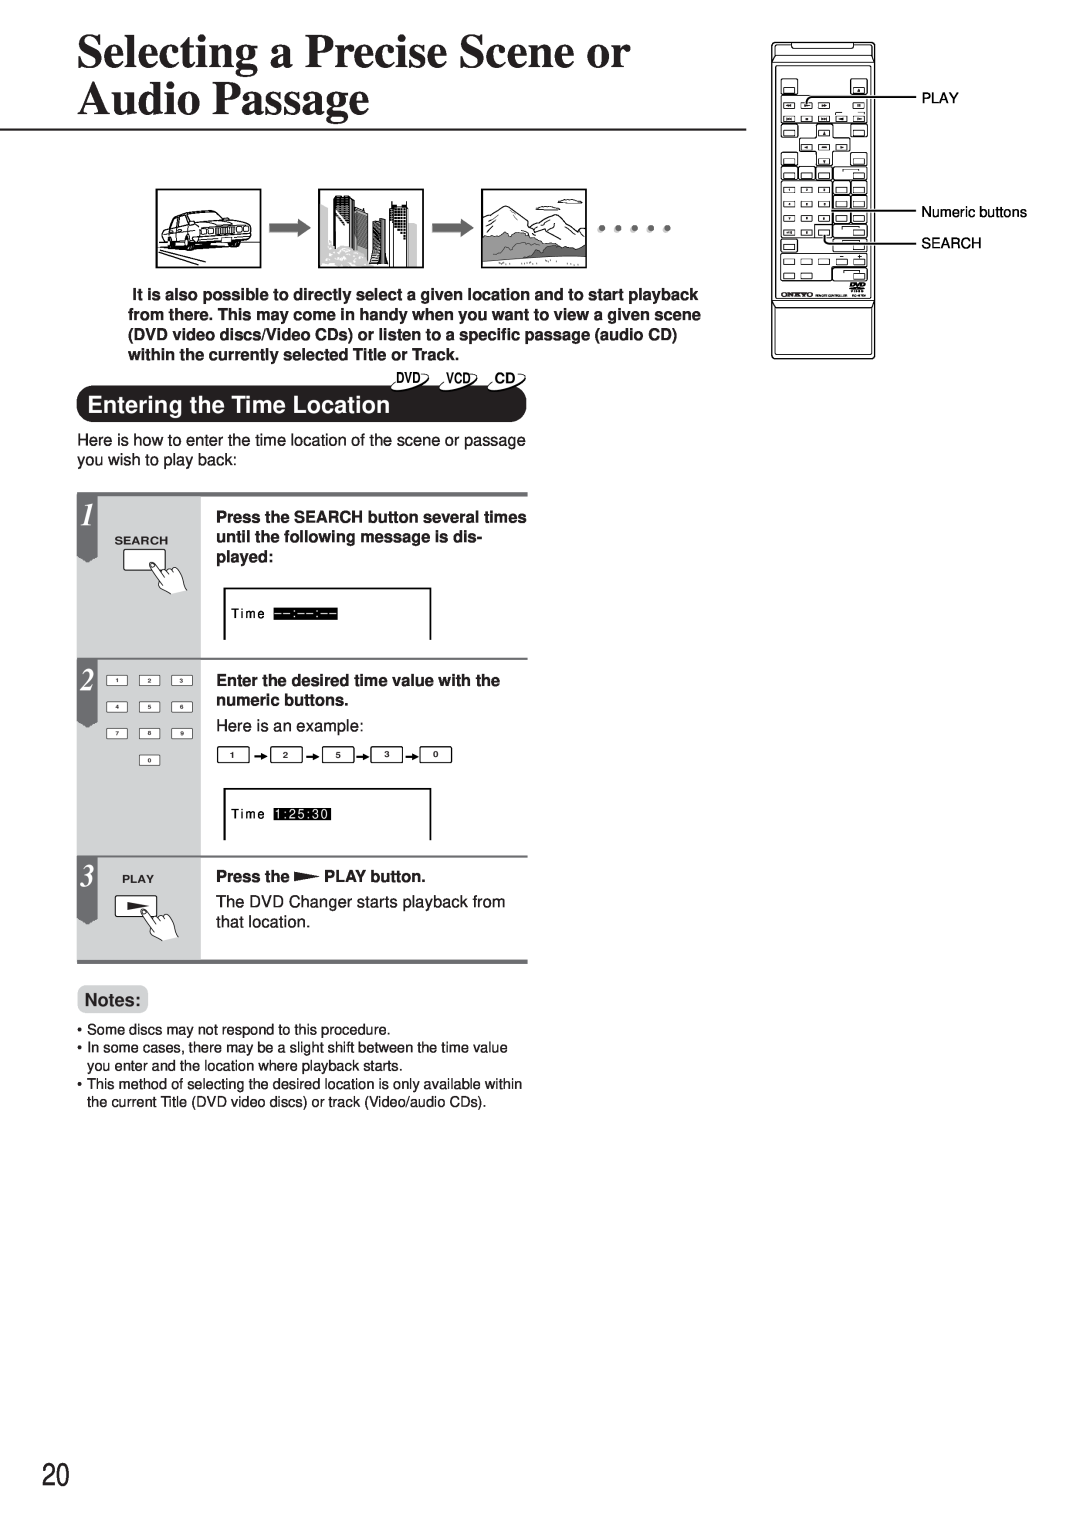 Onkyo DV-C501 instruction manual Selecting a Precise Scene or Audio Passage, Entering the Time Location 